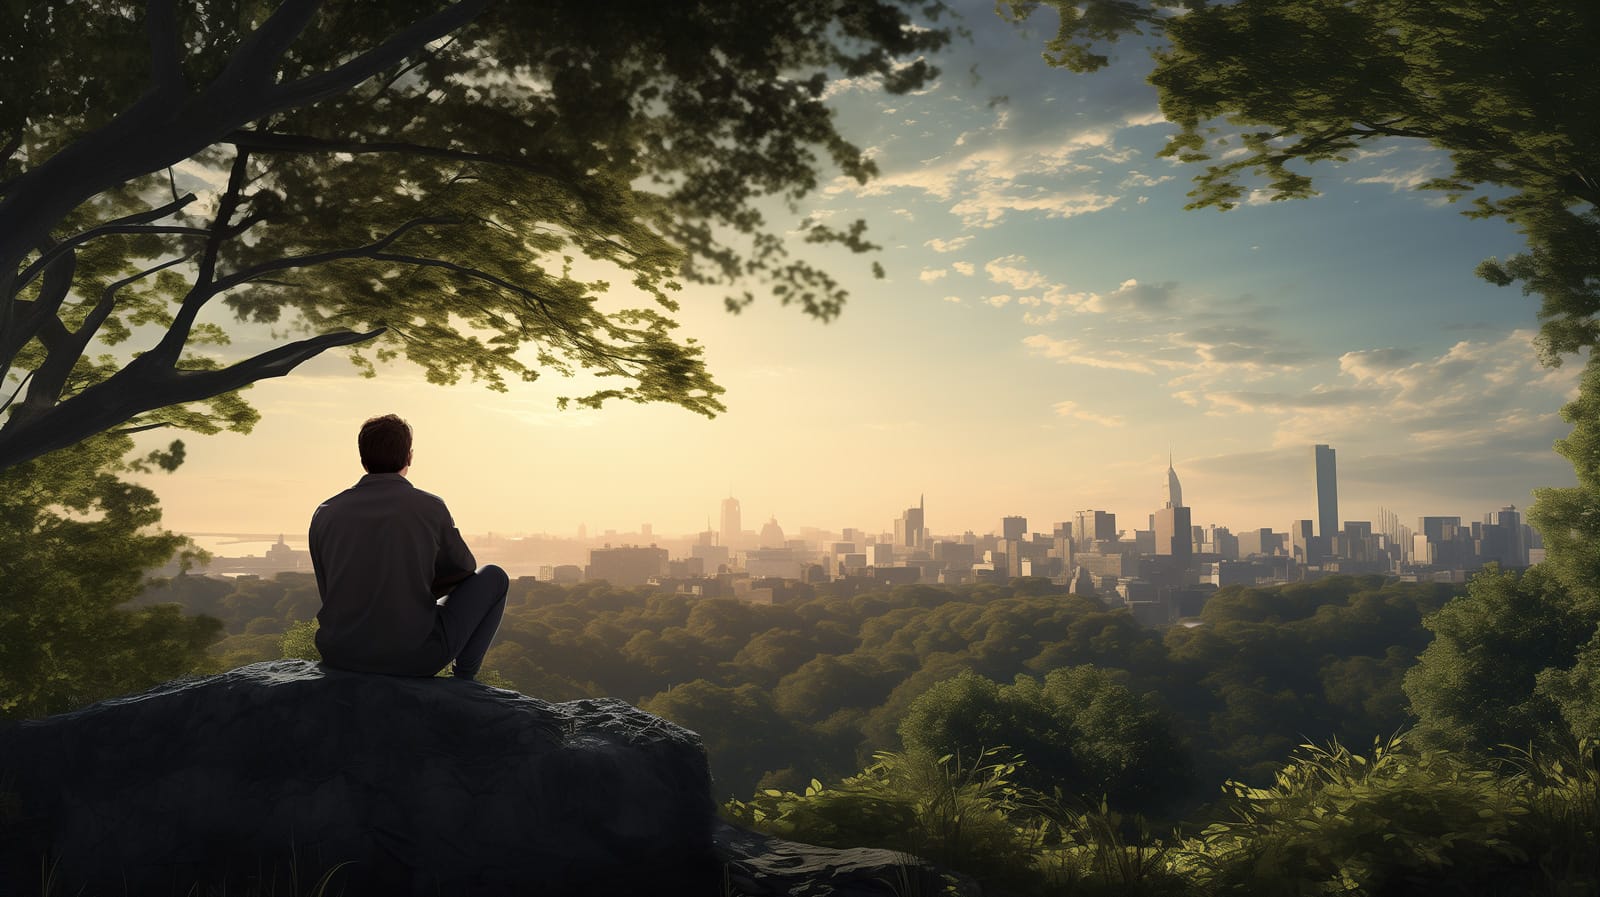 A middle aged man sat on top of a rock looking out over a city in deep thought